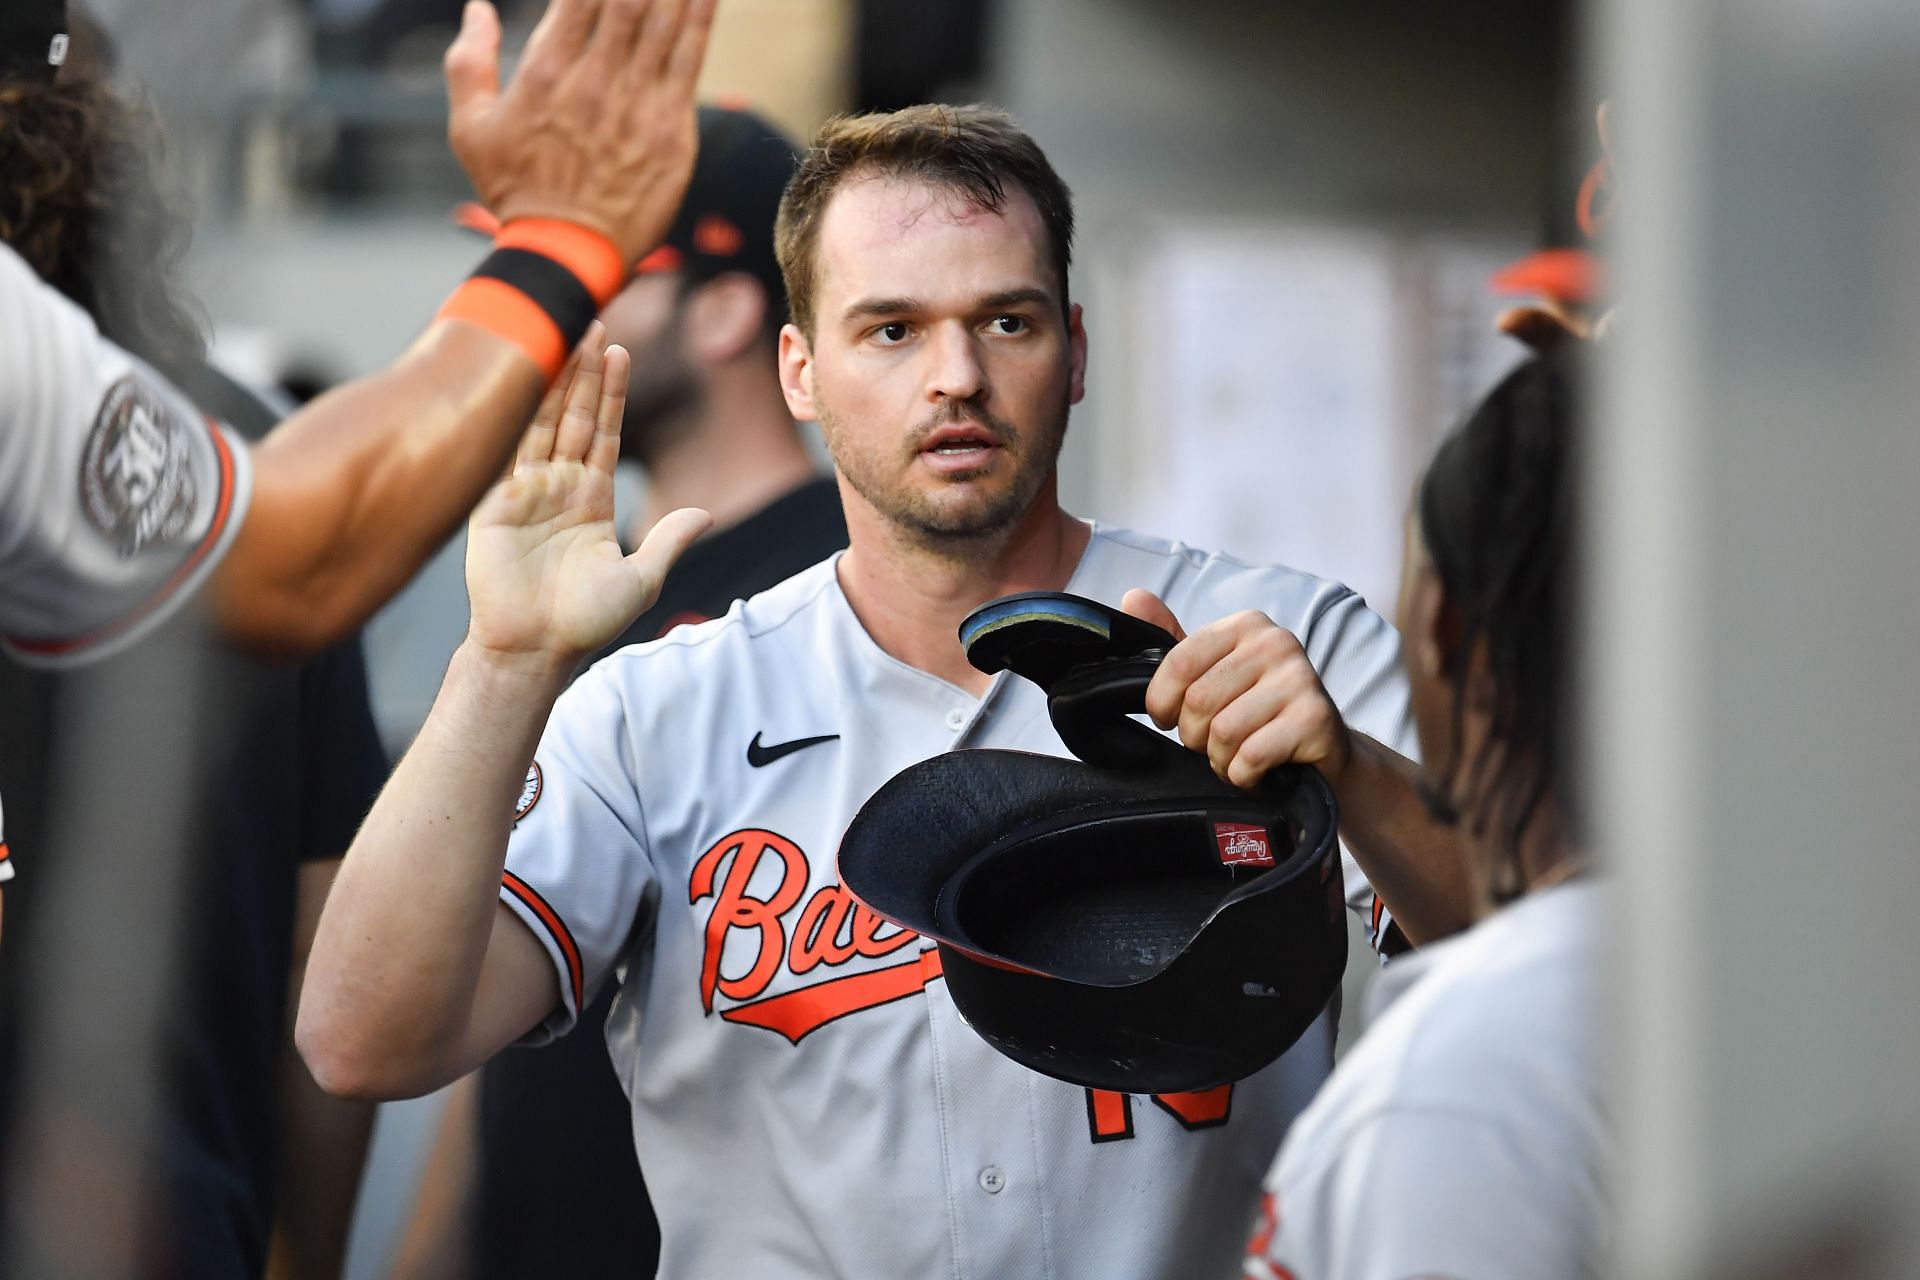 Trey Mancini knew a return to the Orioles was 'off the table.' It didn't  dull his love for Baltimore.